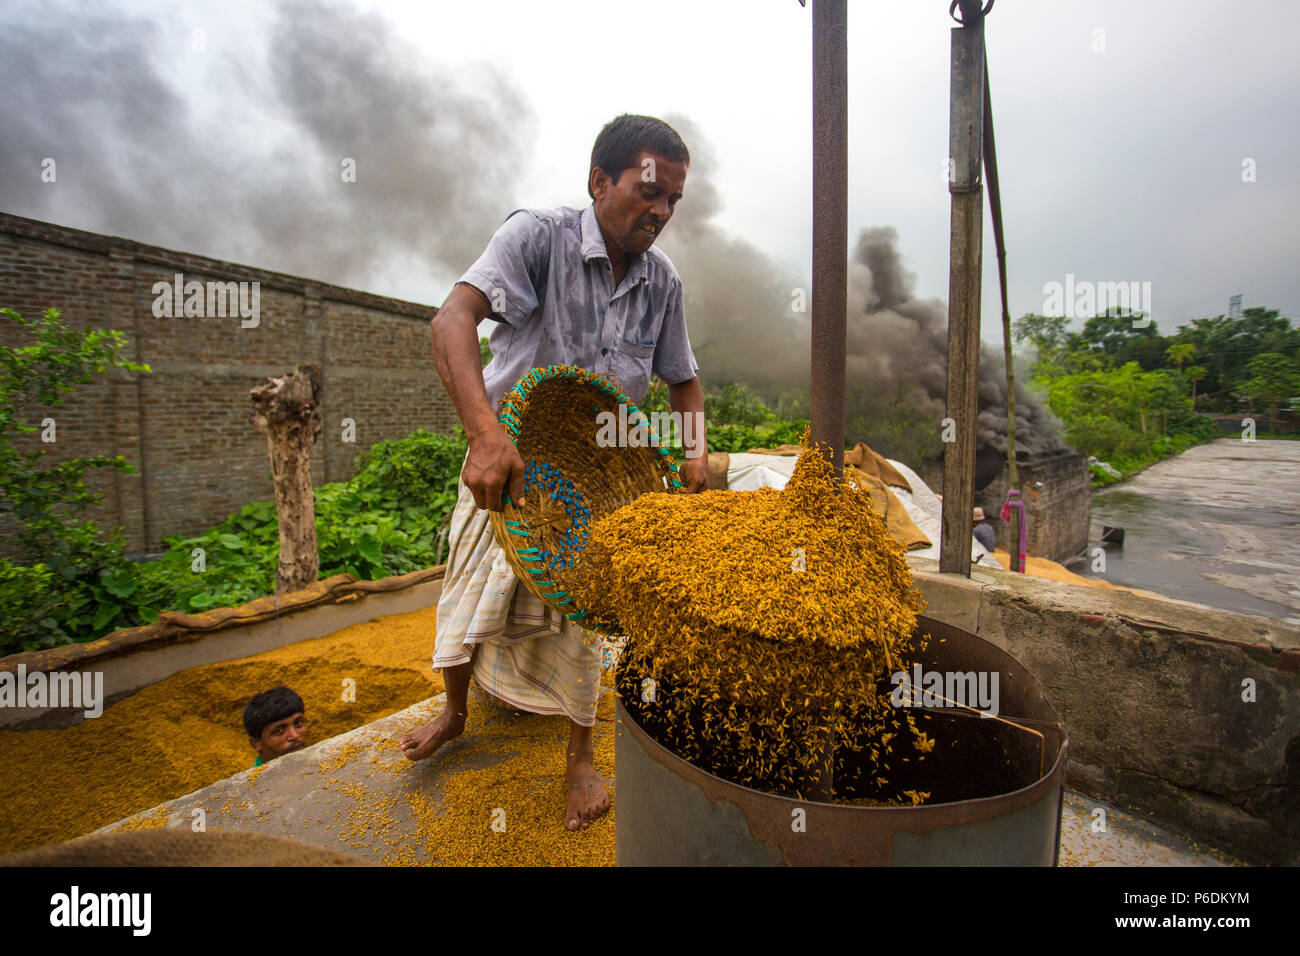 The rice is being poured into the machine for boiling at Ishwardi Upazila, Pabna District in Rajshahi Division, Bangladesh. Stock Photo